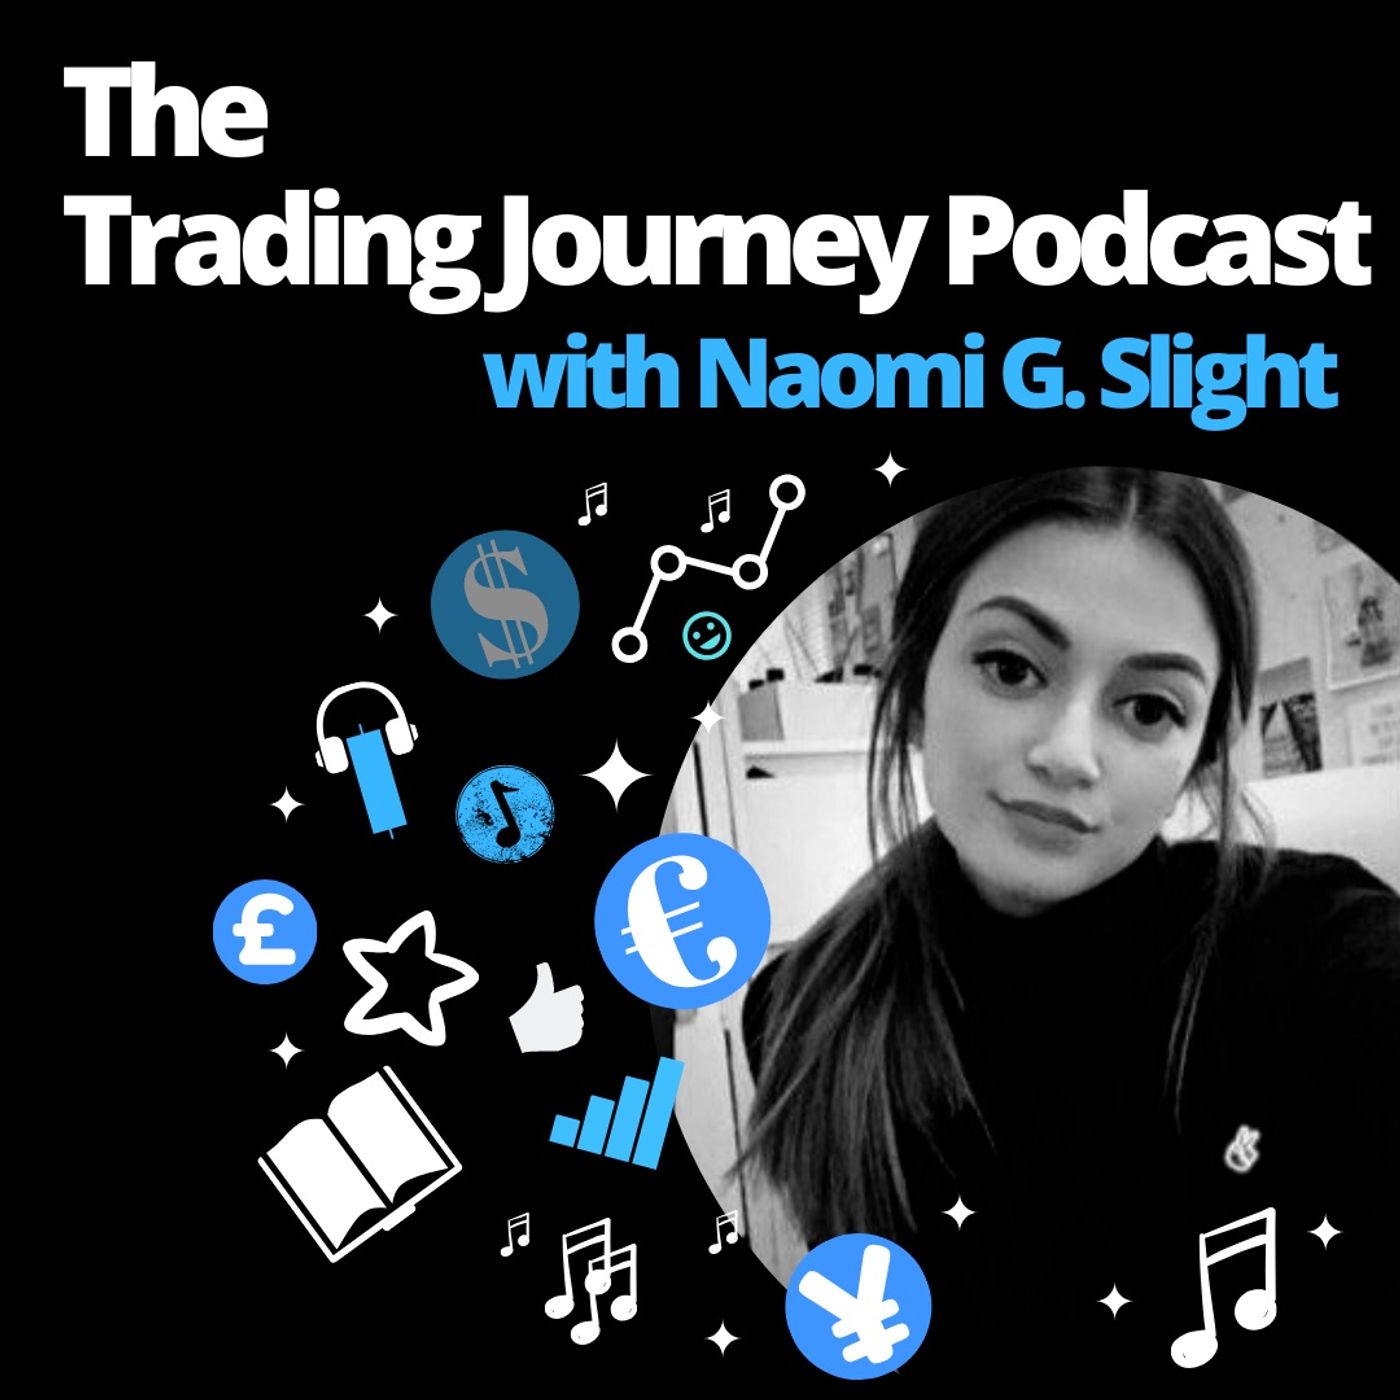 The Trading Journey Podcast